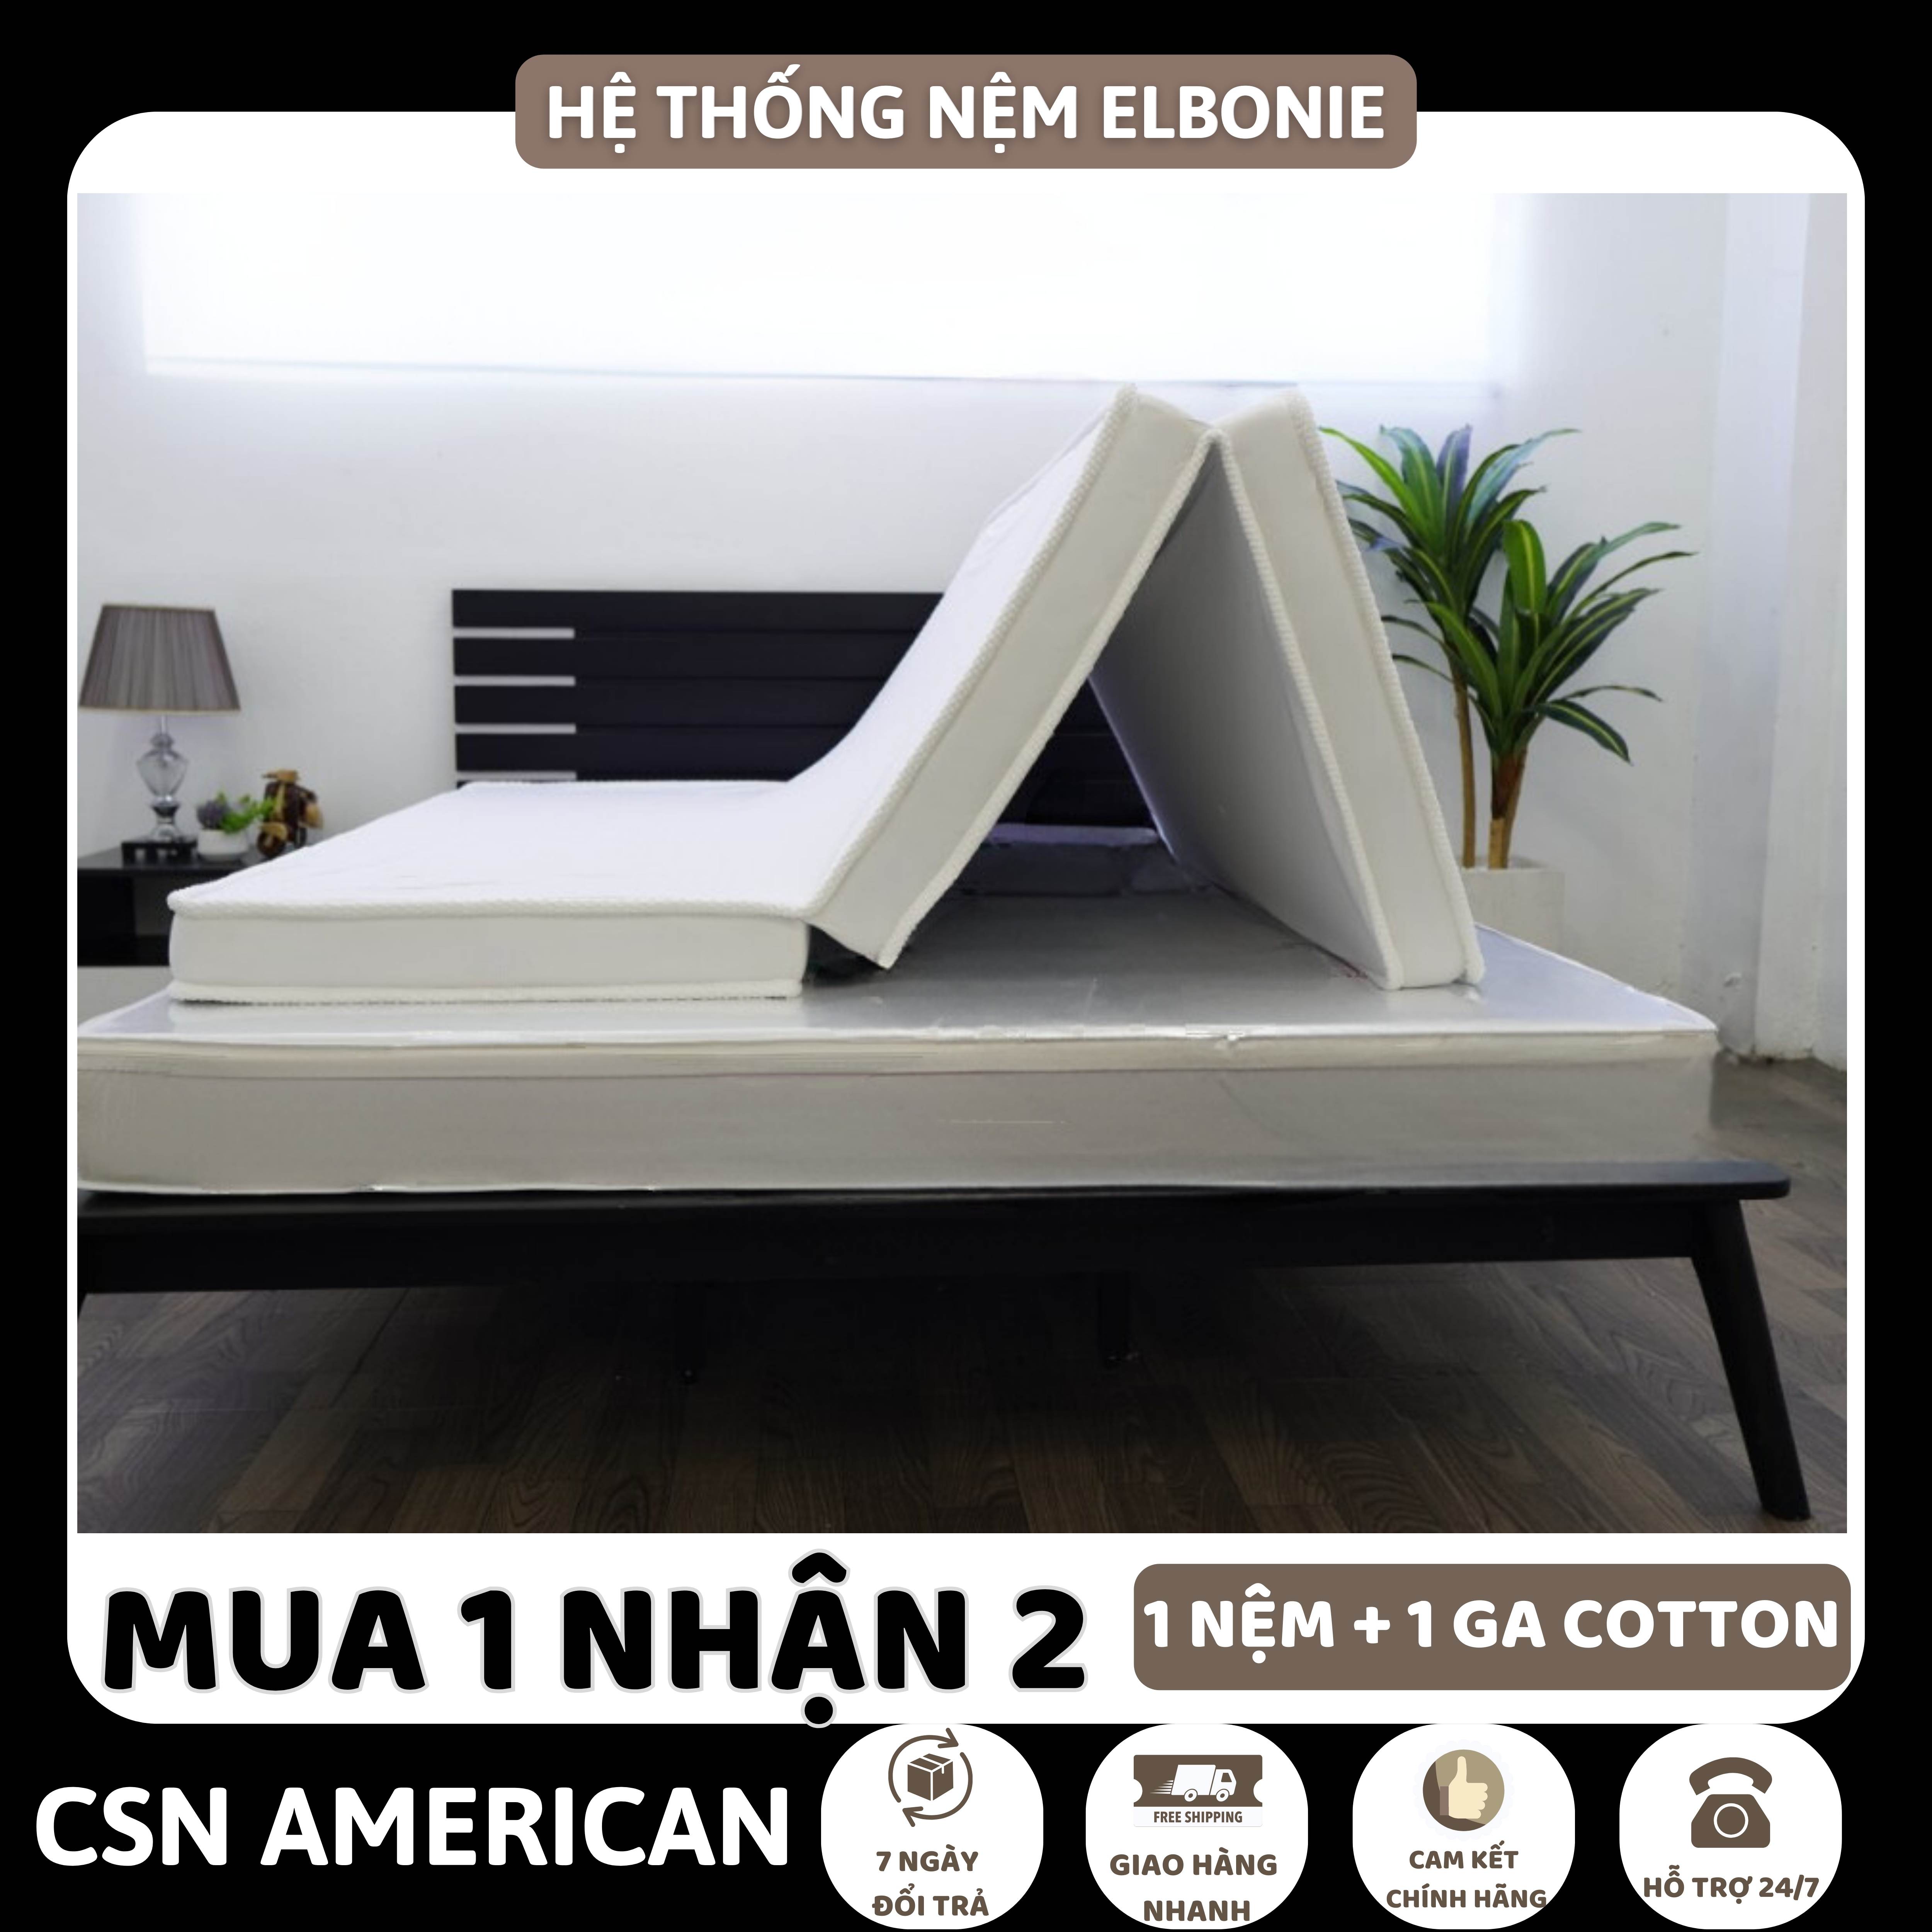 CHEAP PRICE - 3 fold mattress-, breathable, smooth to support the spine